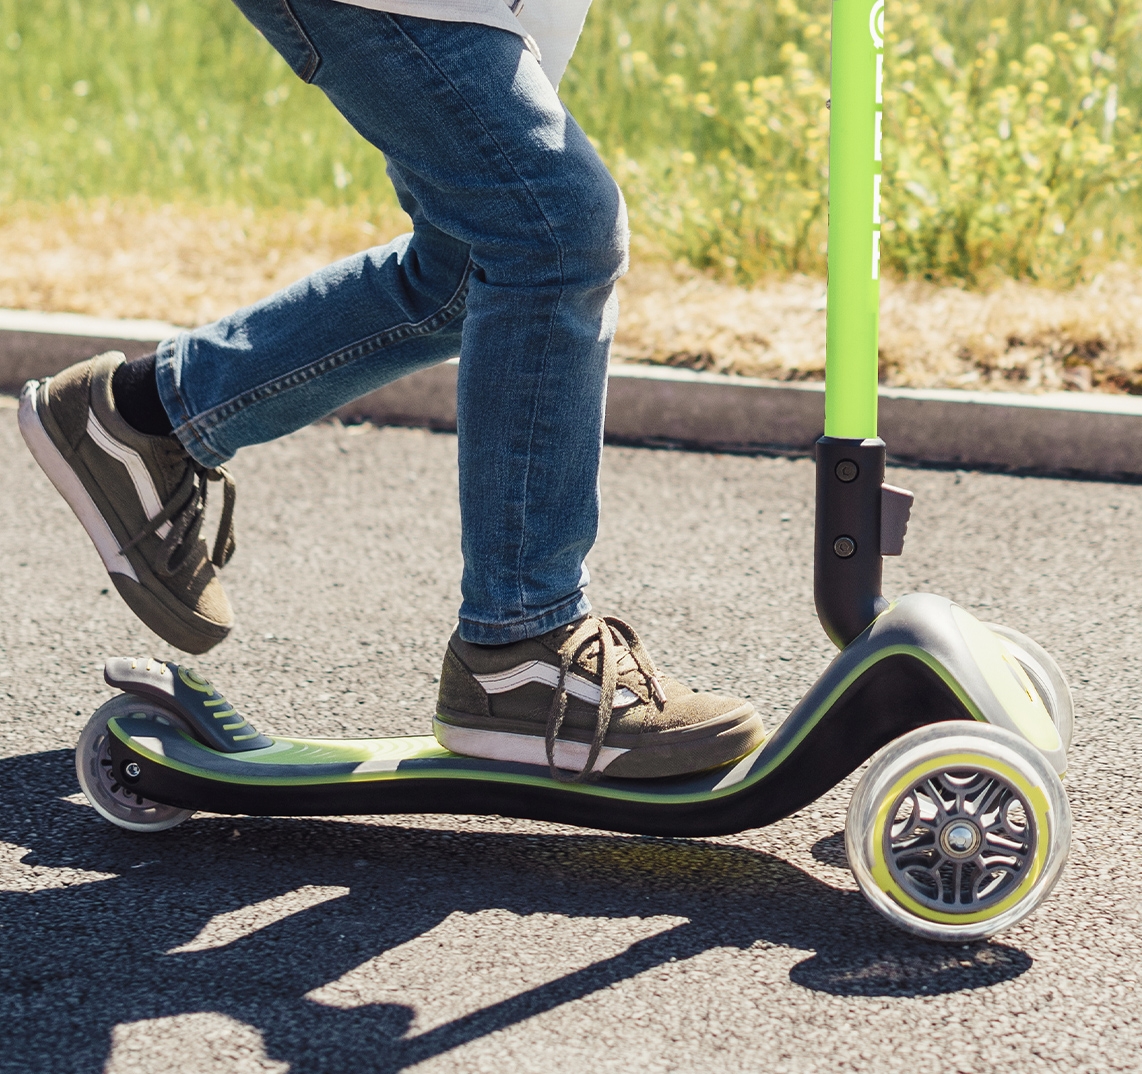 Green light-up scooter for kids with an extra-wide scooter deck